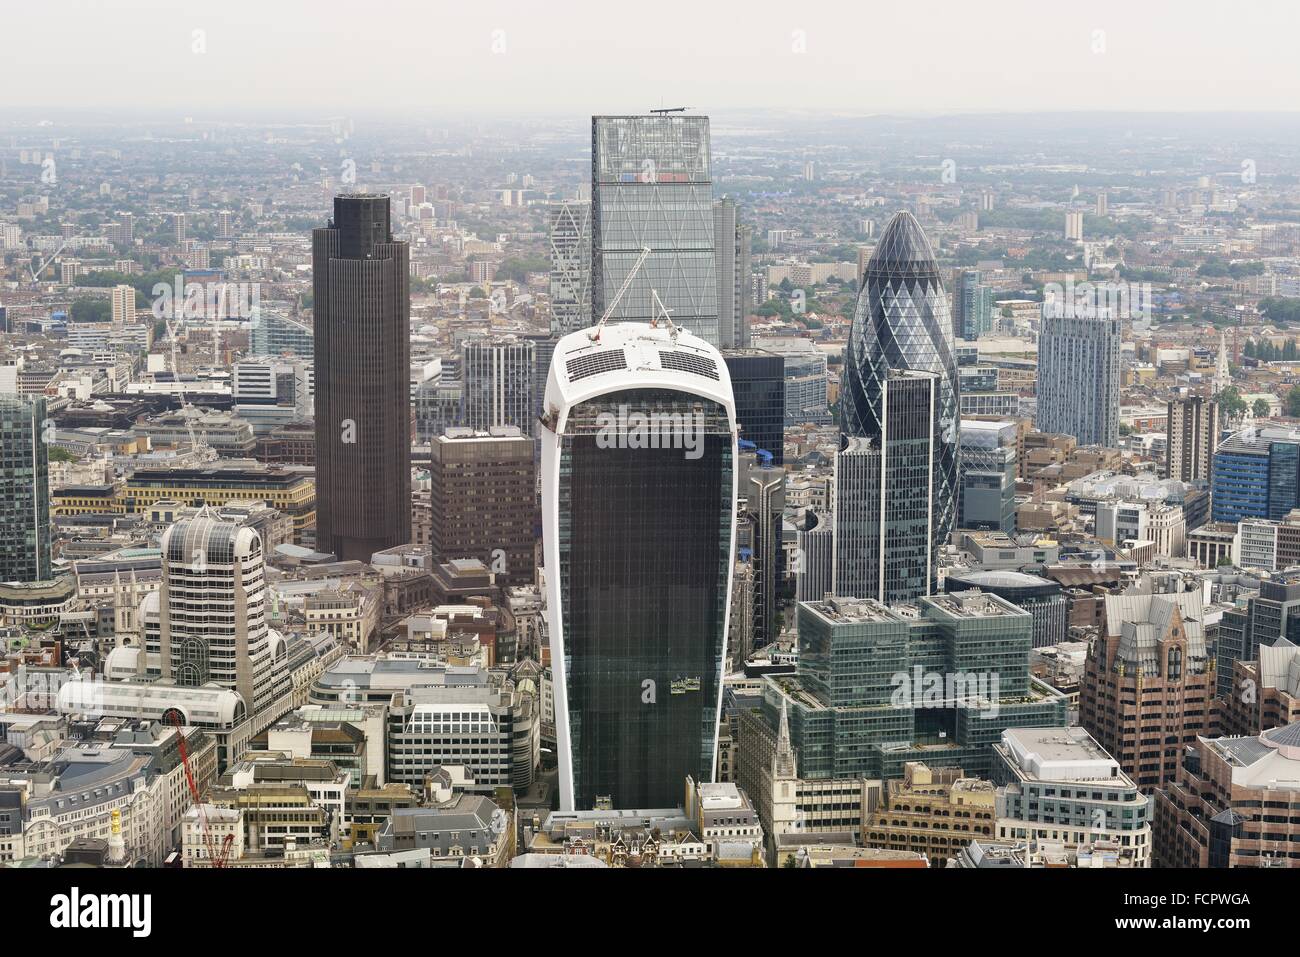 View of the City of London from The Shard, with the Walkie Talkie, Nat West Tower, The Cheesegrater and the Gherkin Stock Photo